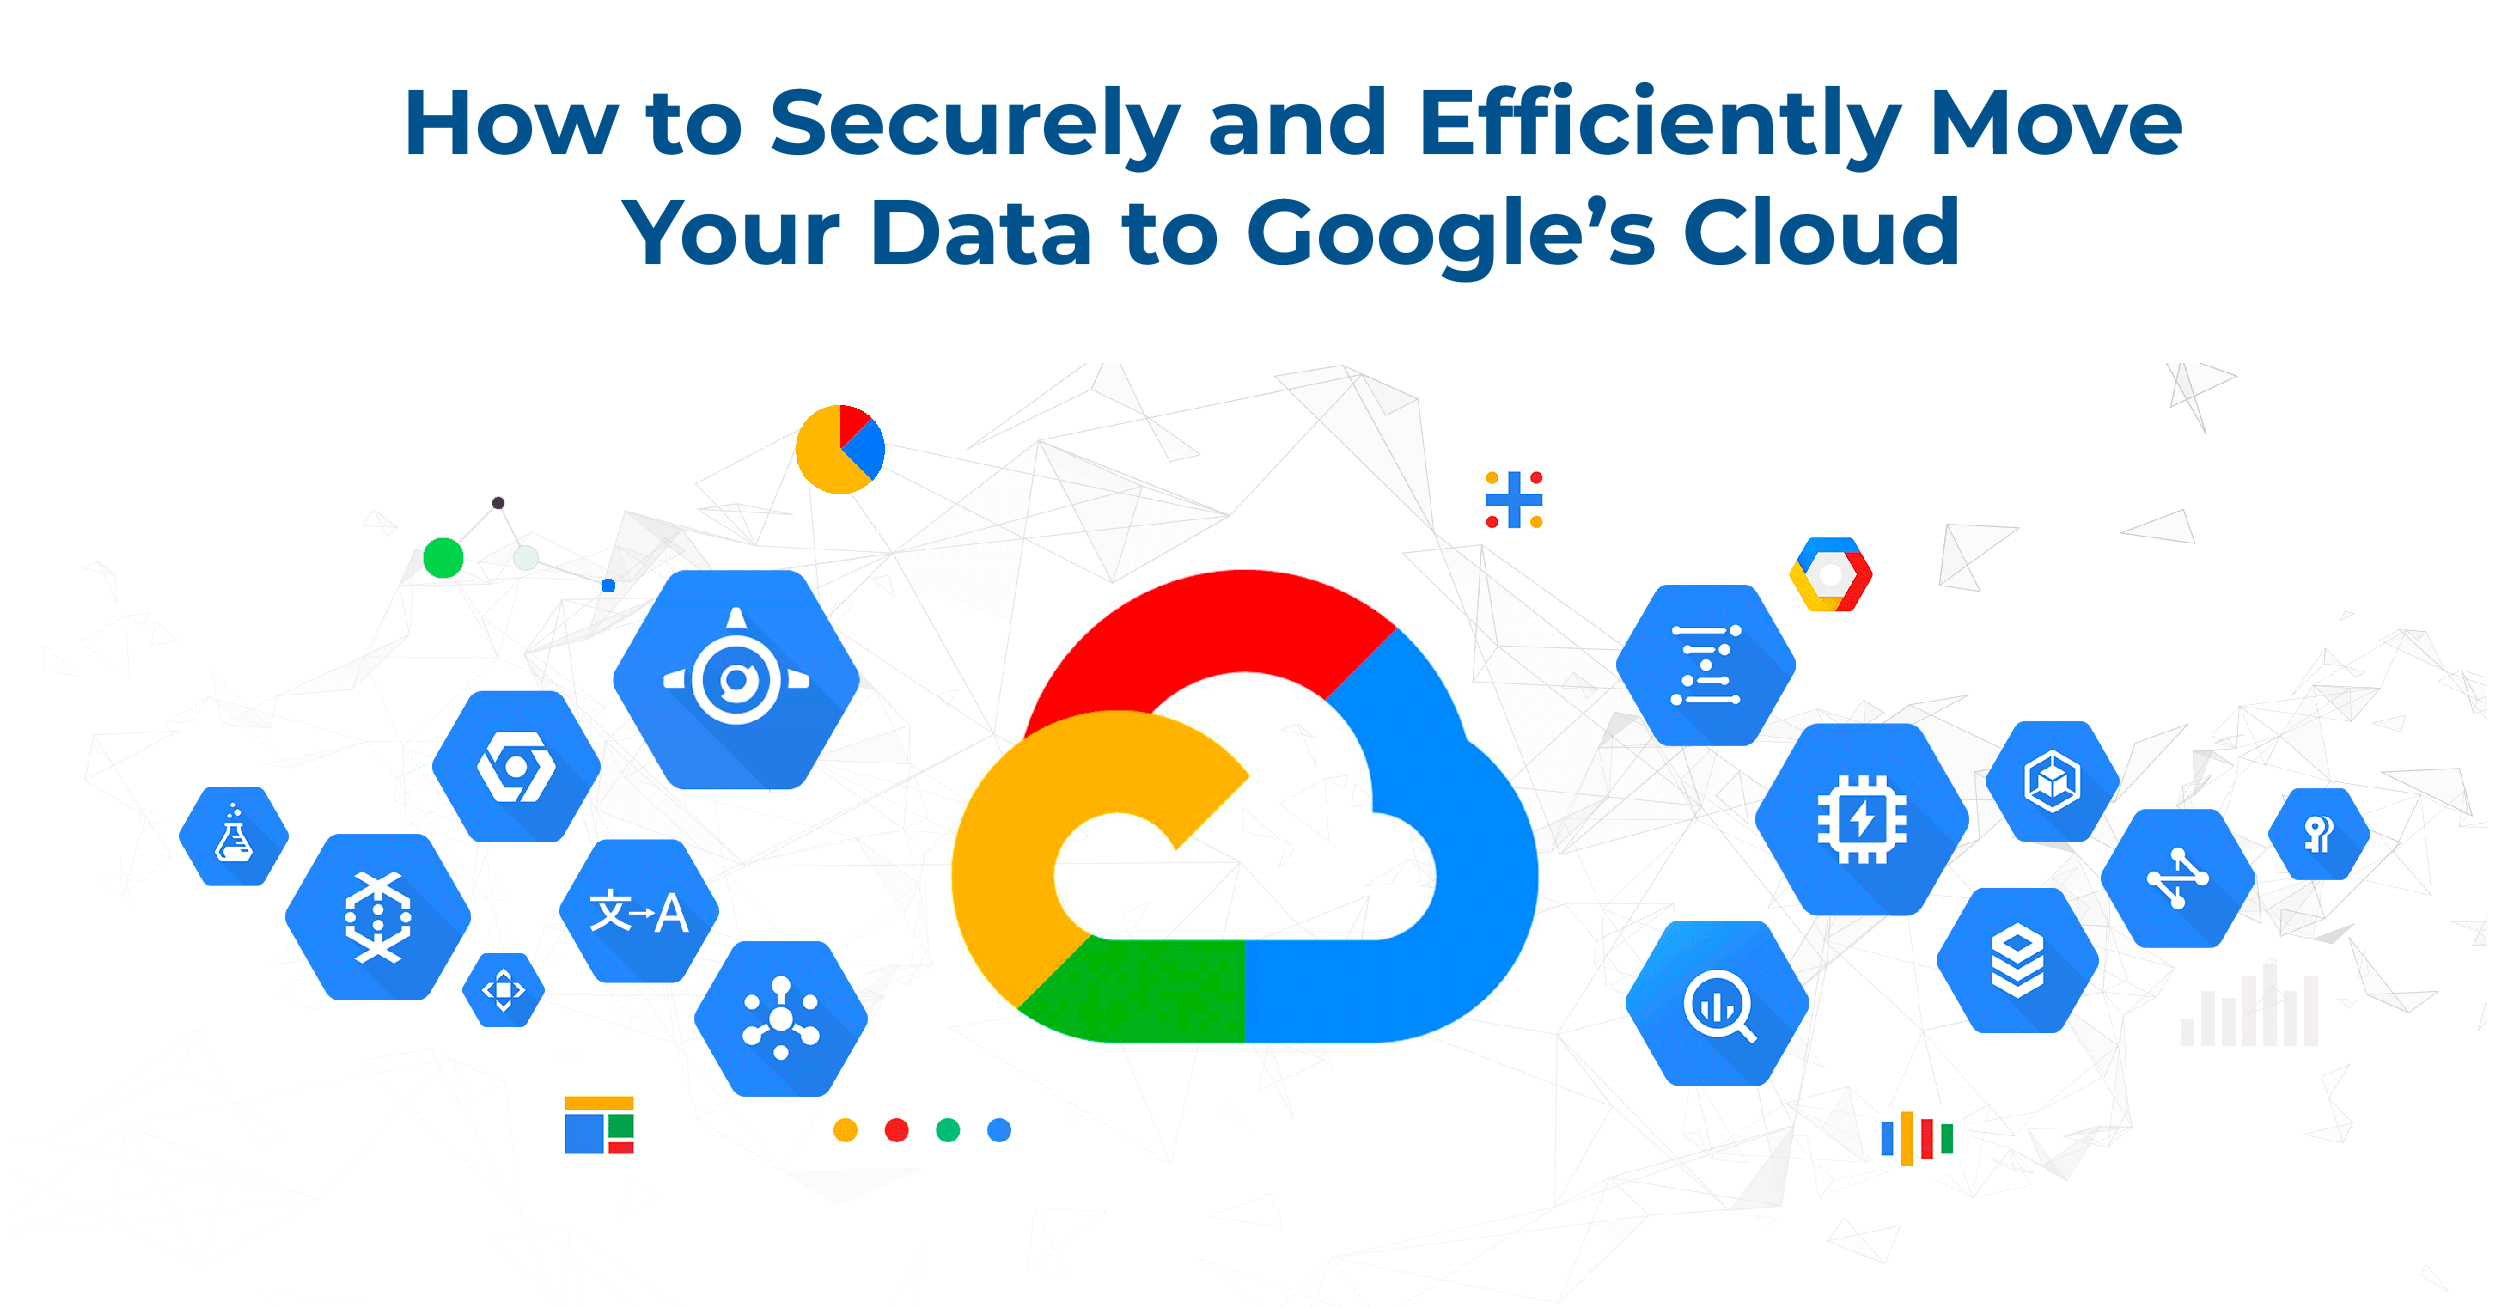 How to Securely and Efficiently Move Your Data to Google’s Cloud